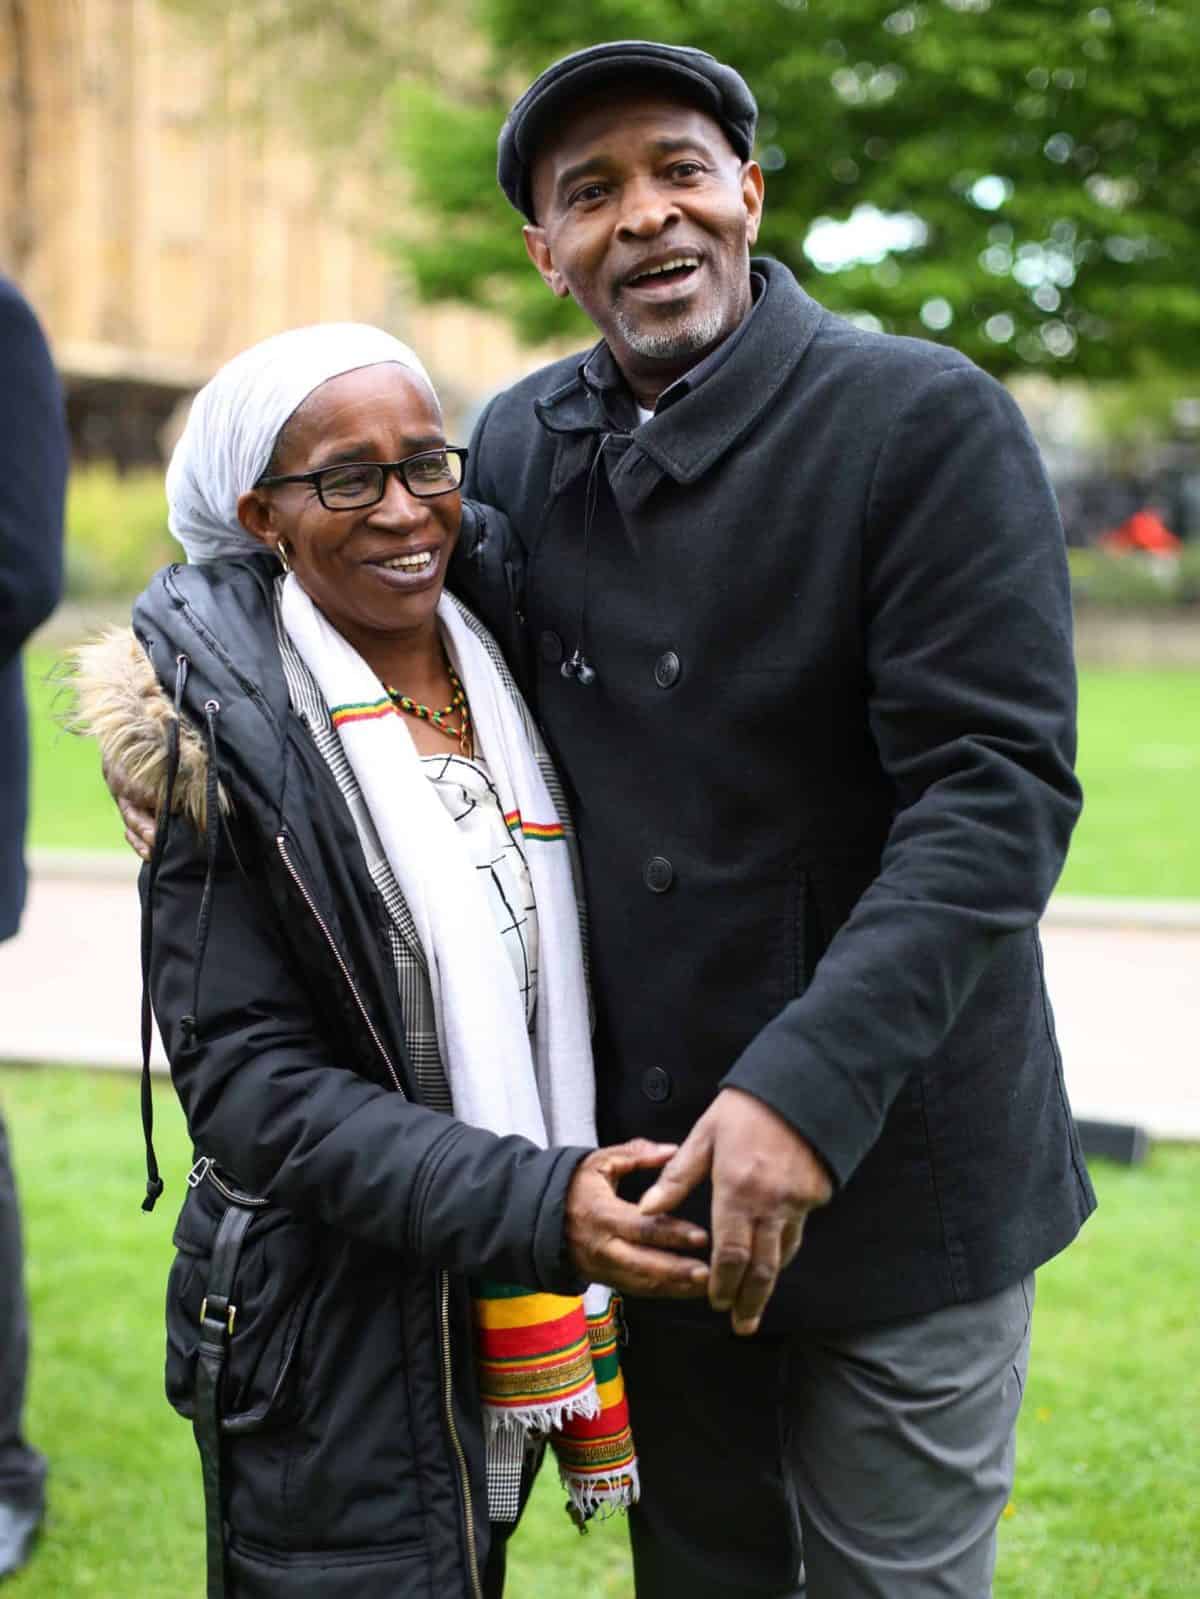 Members of the Windrush generation Paulette Wilson, 62, who arrived from Jamaica in 1968, and Anthony Bryan, aged 60, who arrived from Jamaica in 1965, during a photocall in Westminster, London, following a personal apology from immigration minister Caroline Nokes this afternoon, as they visited Parliament for the first time since the scandal forced the home secretary to resign.